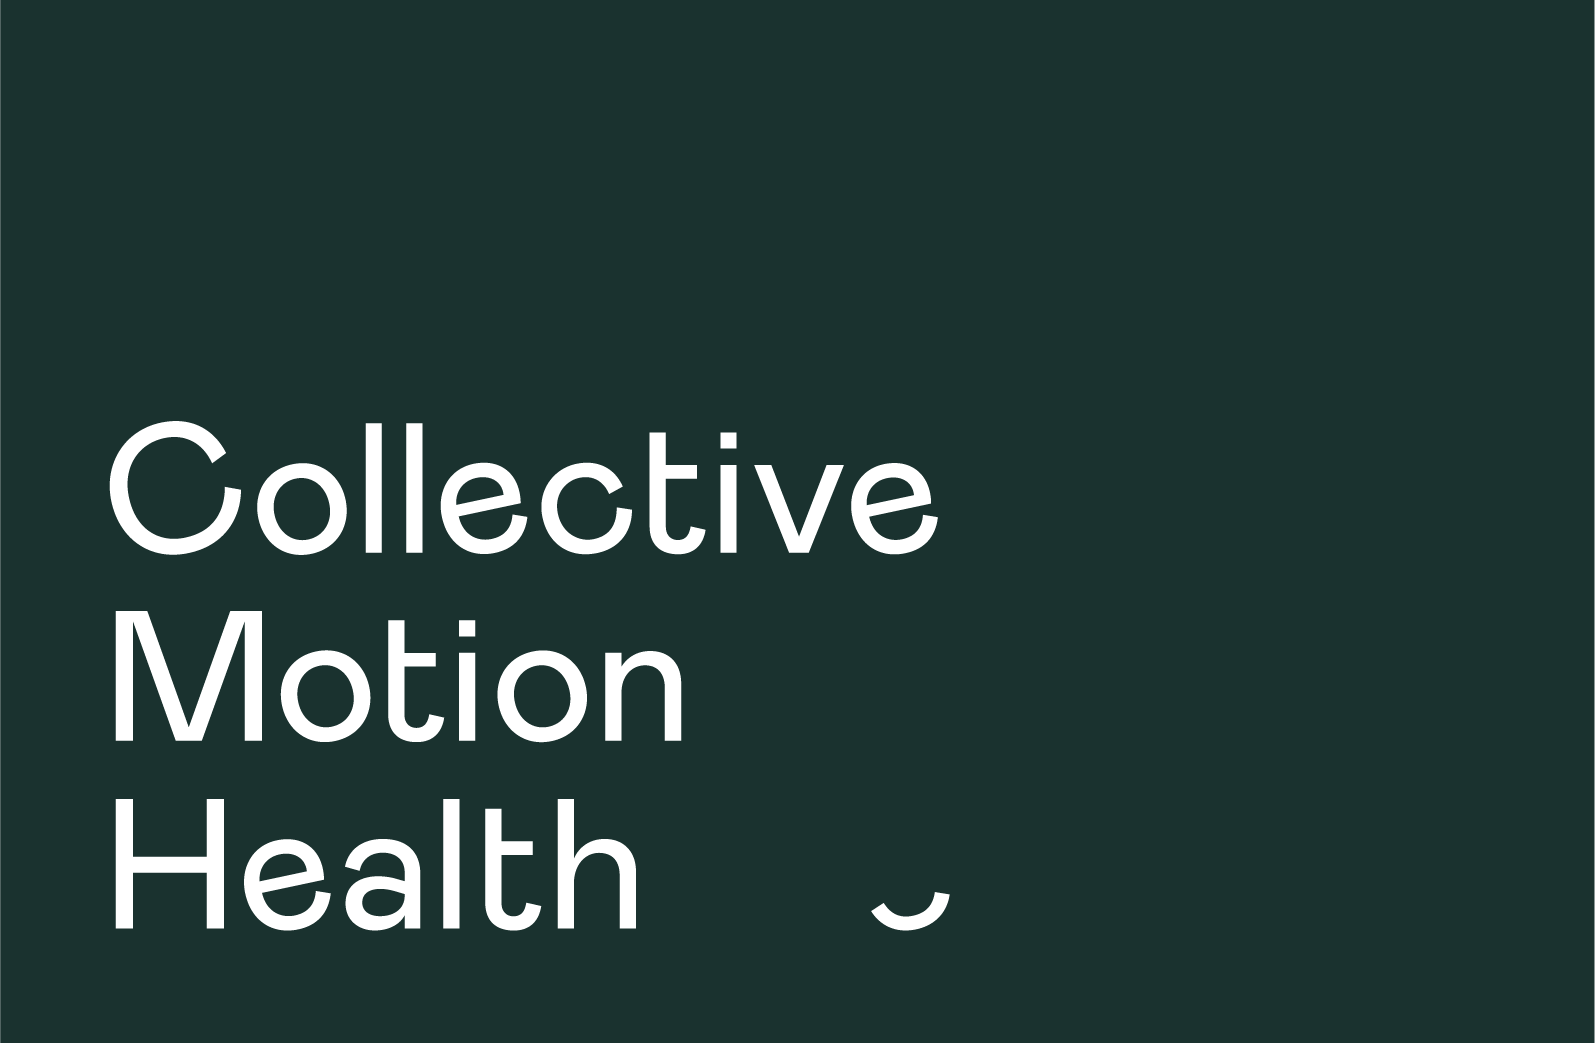 Collective Motion Health